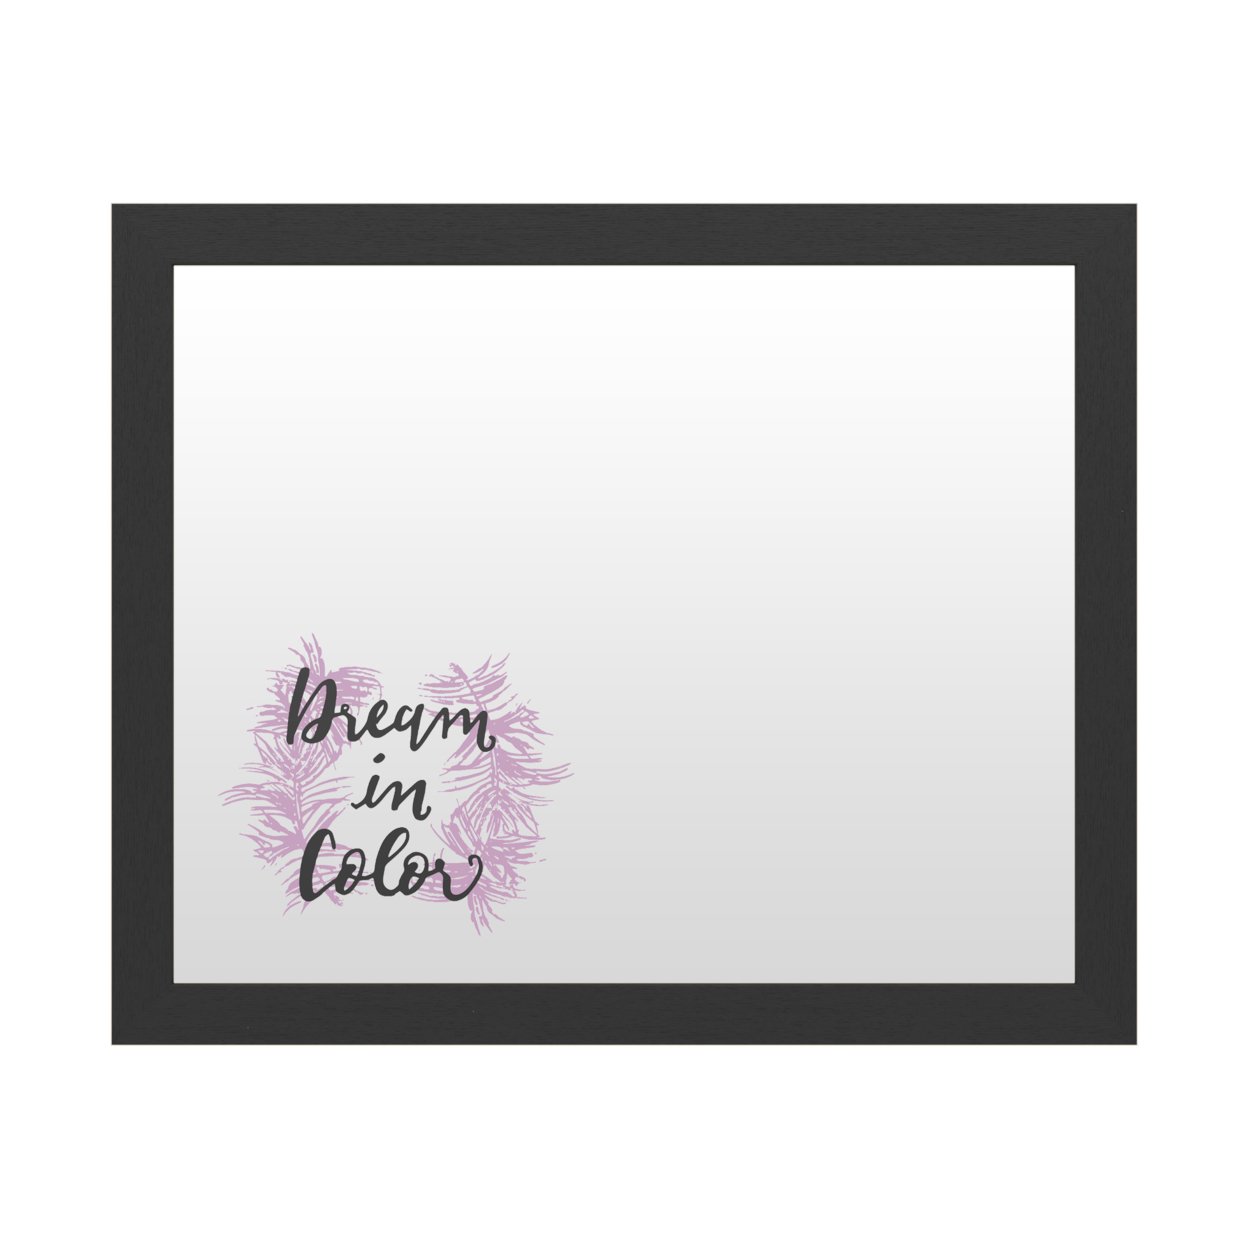 Dry Erase 16 X 20 Marker Board With Printed Artwork - Dream In Color White Board - Ready To Hang